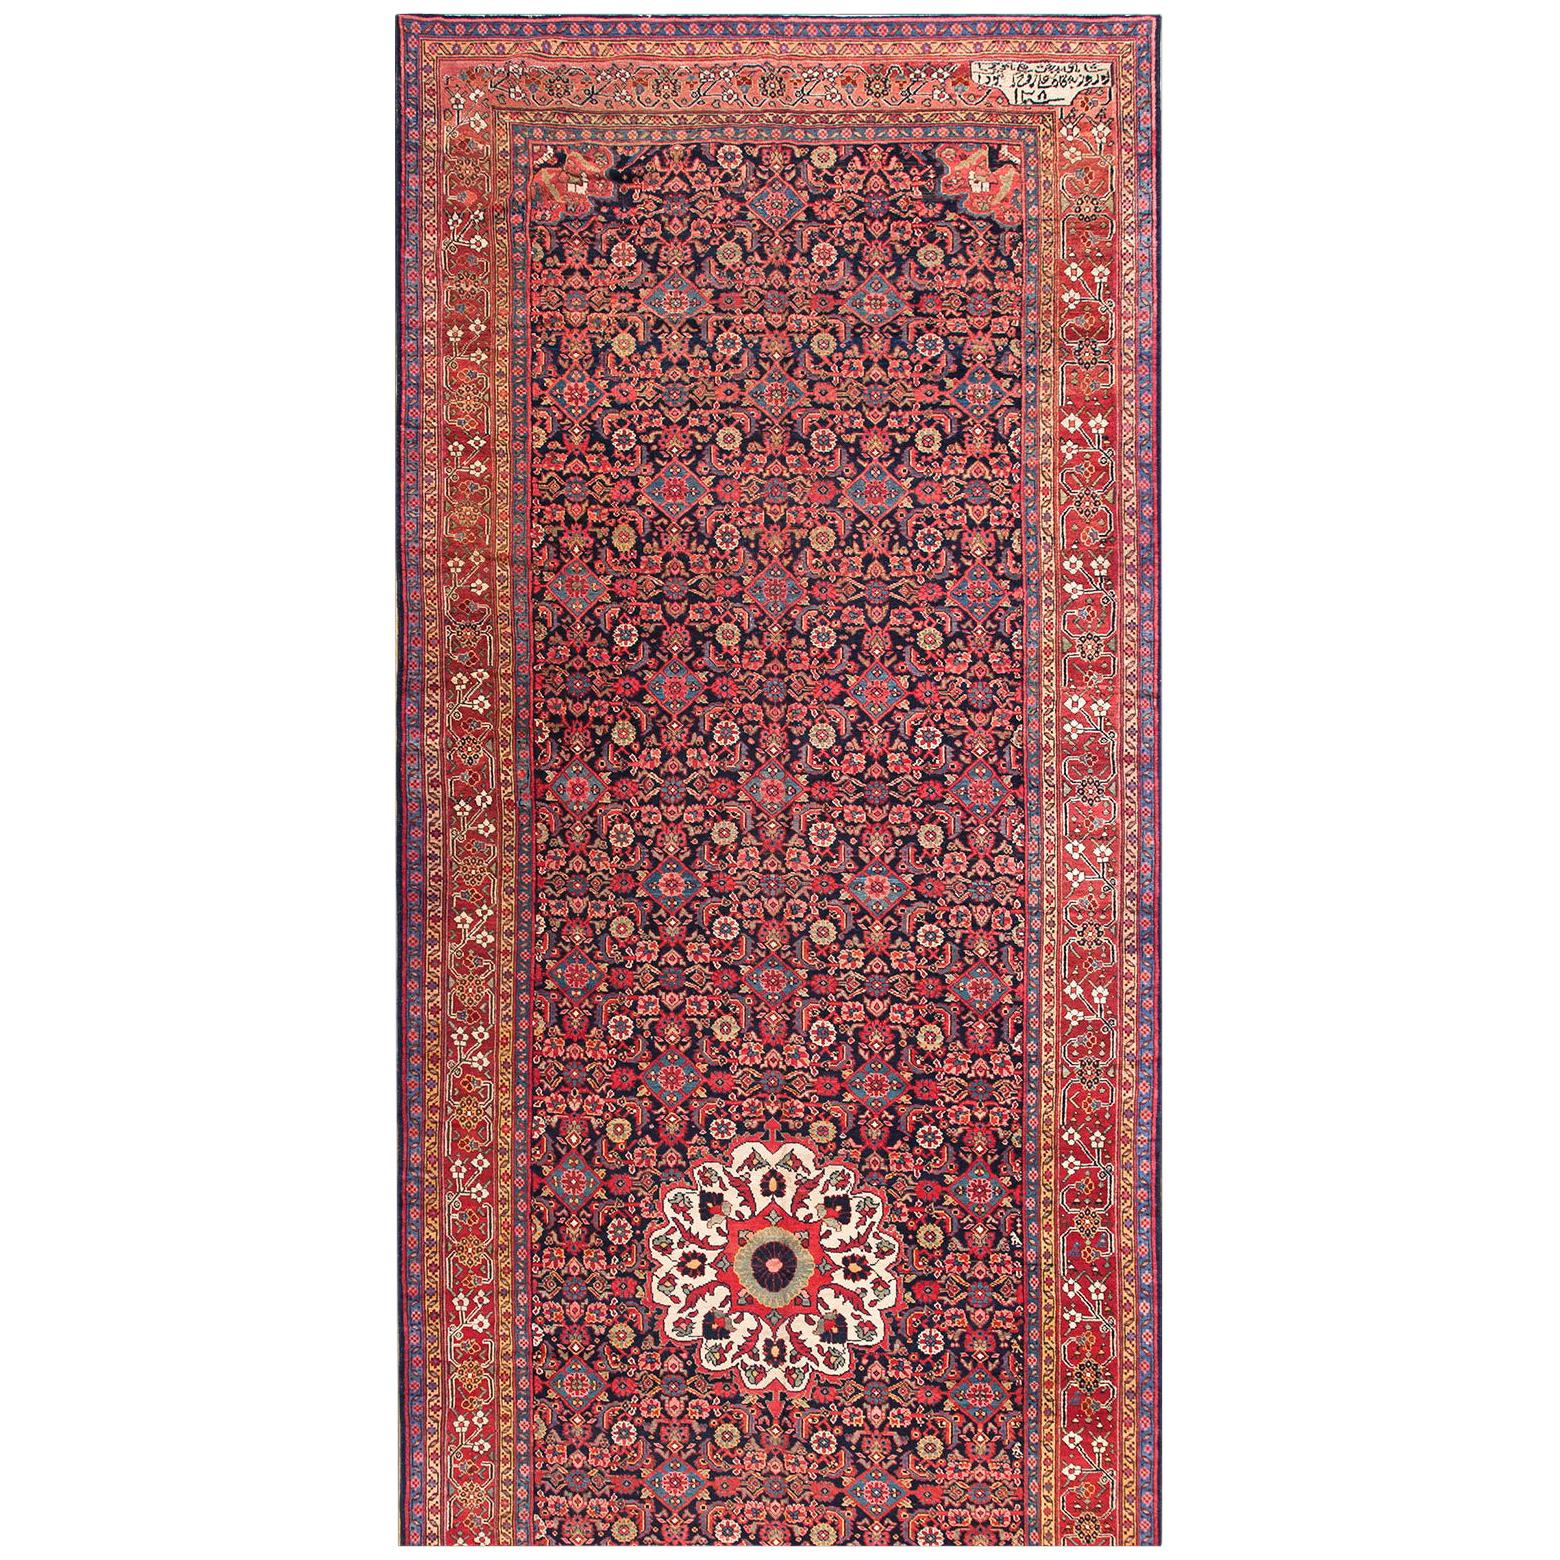 Antique NW Persian Long Gallery Carpet Dated 1863 ( 8' x 26'6" - 244 x 808 cm) For Sale